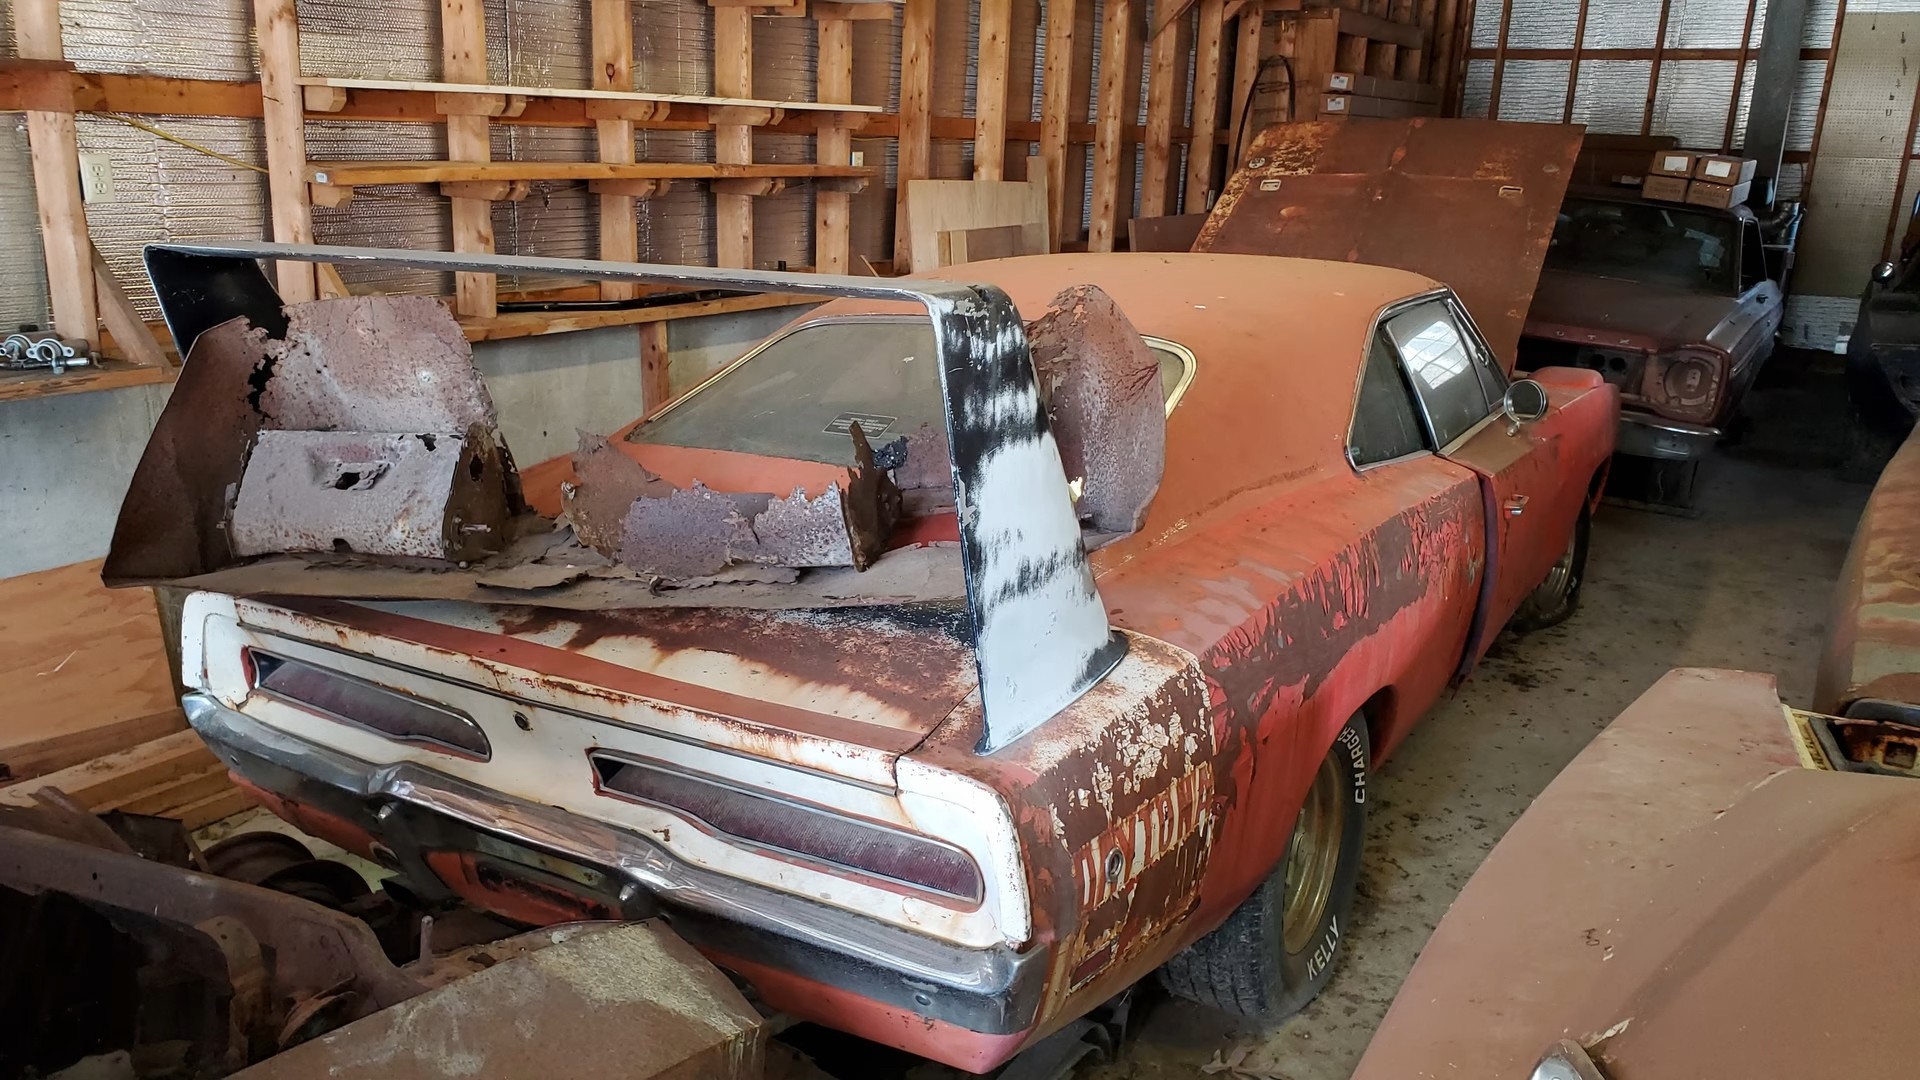 Mysterious 1969 Dodge Charger Daytona Spent Decades in Storage